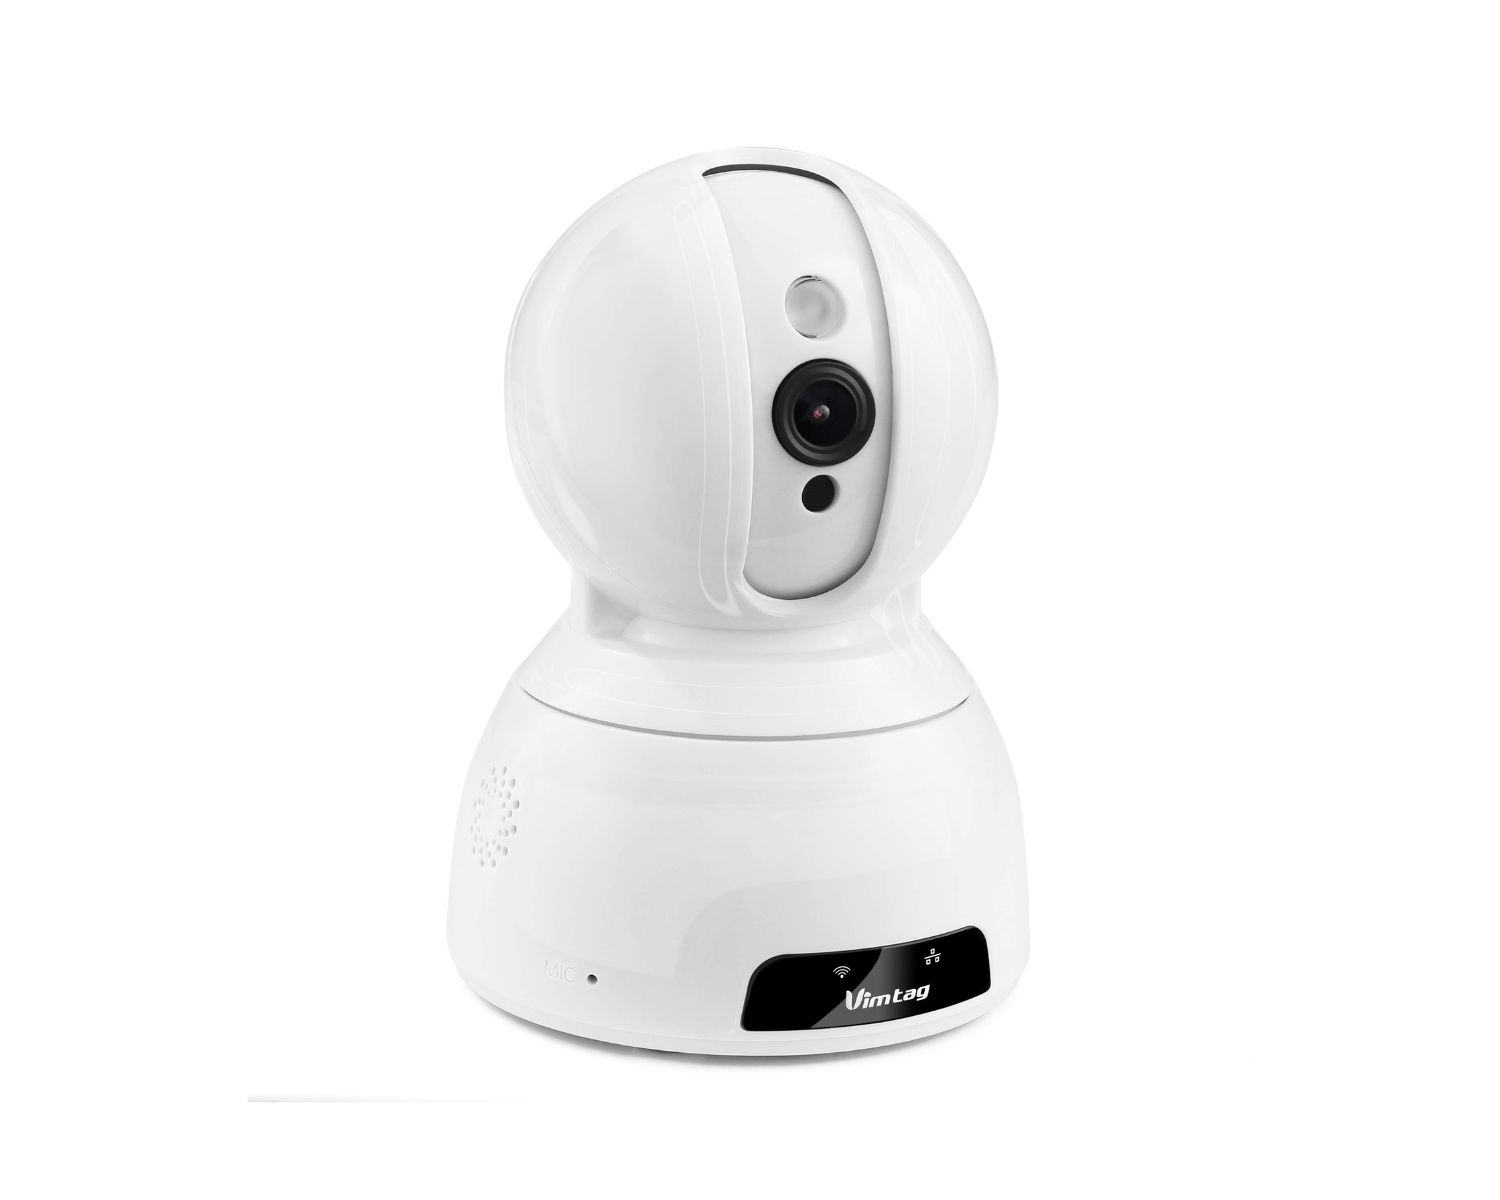 How Do You Playback On Vimtag Outdoor Camera